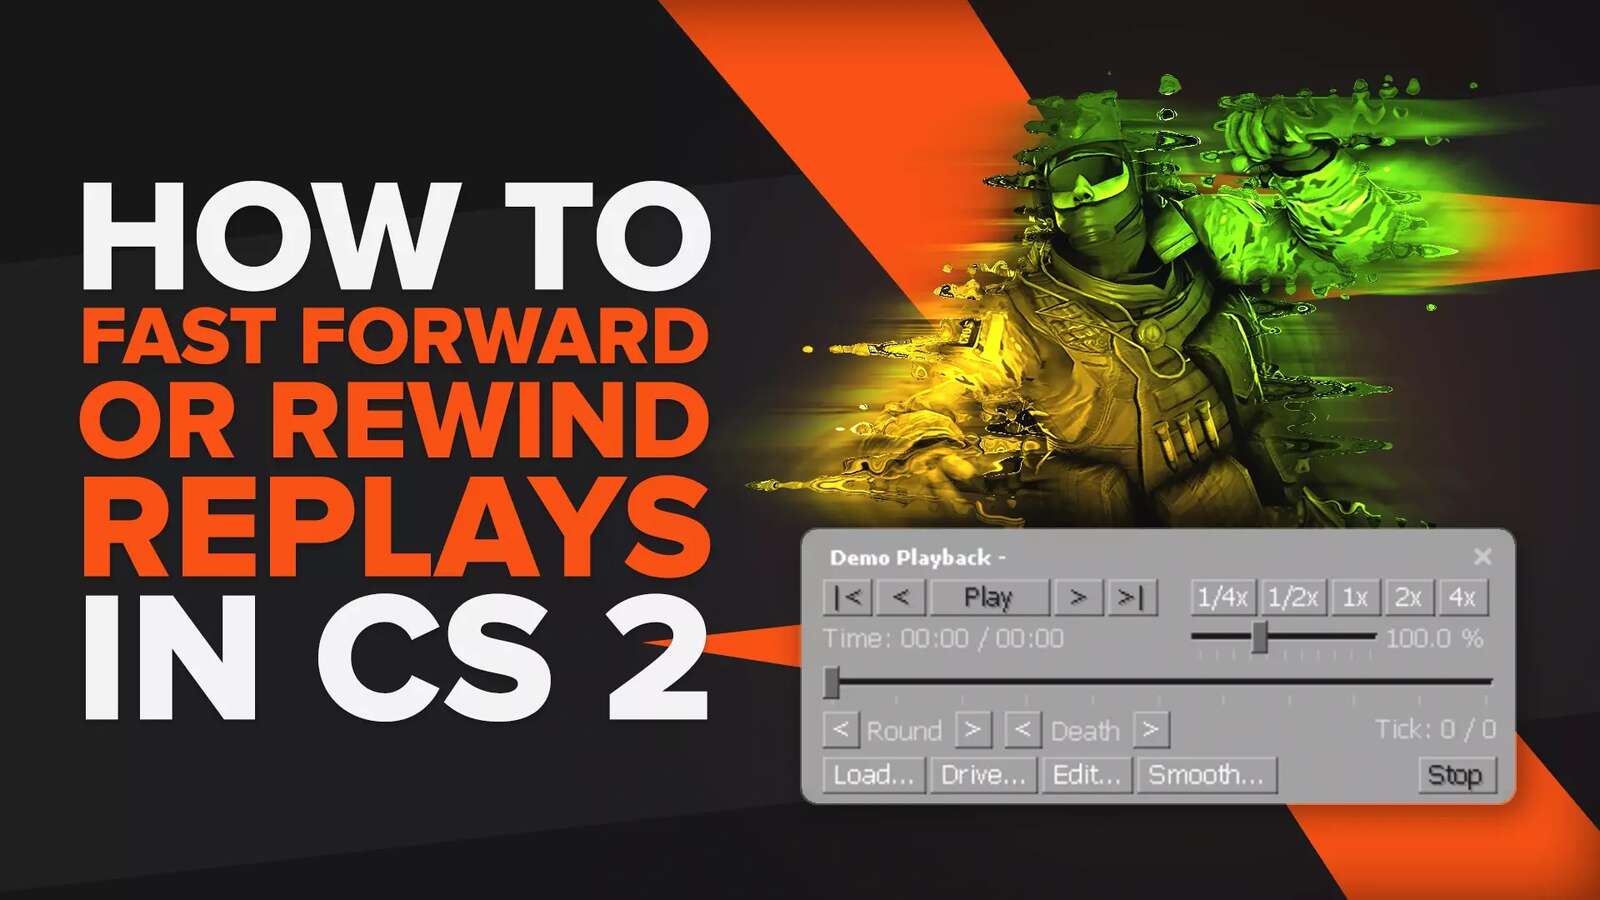 How To Fast Forward Or Rewind Replays In CS2 (CSGO)? [Step-by-Step]